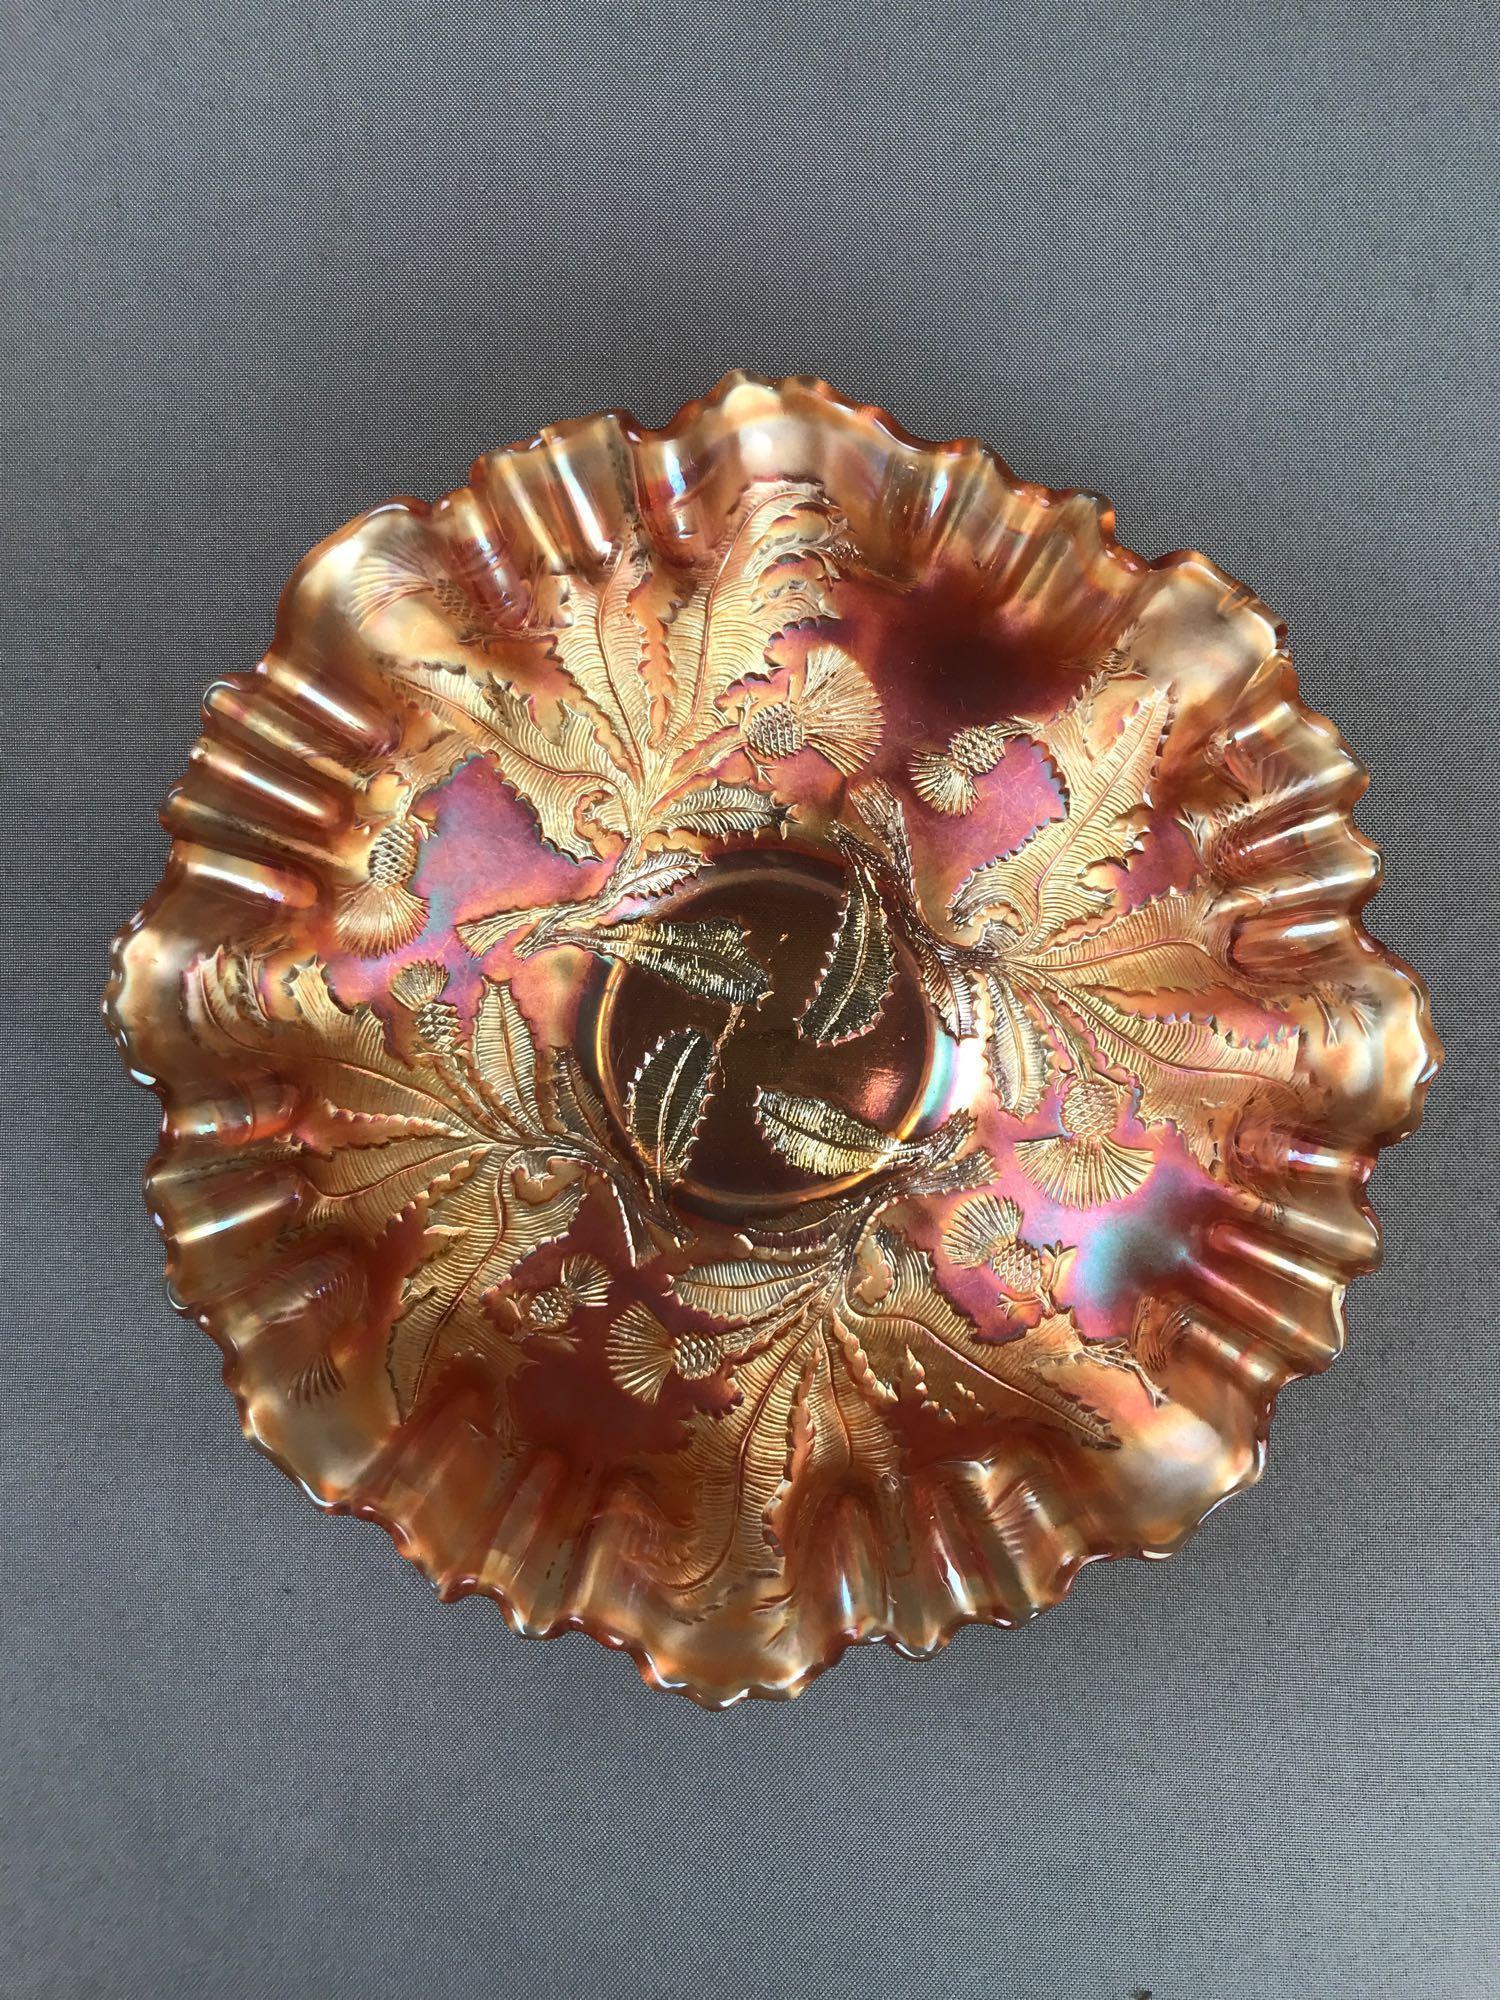 Group of 4 Carnival Glass Bowls